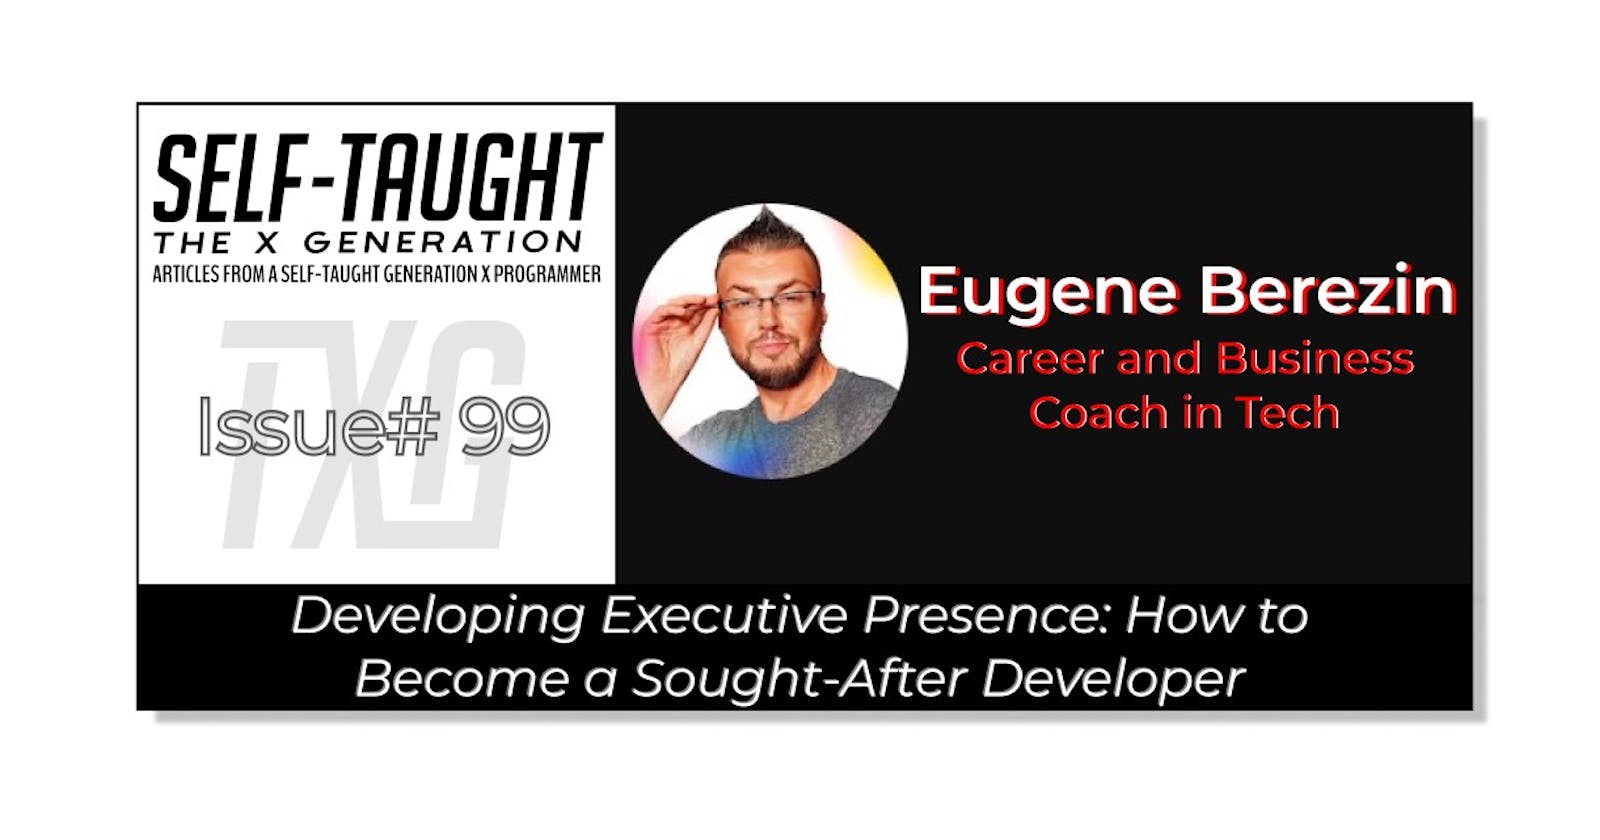 Developing Executive Presence: How to Become a Sought-After Developer